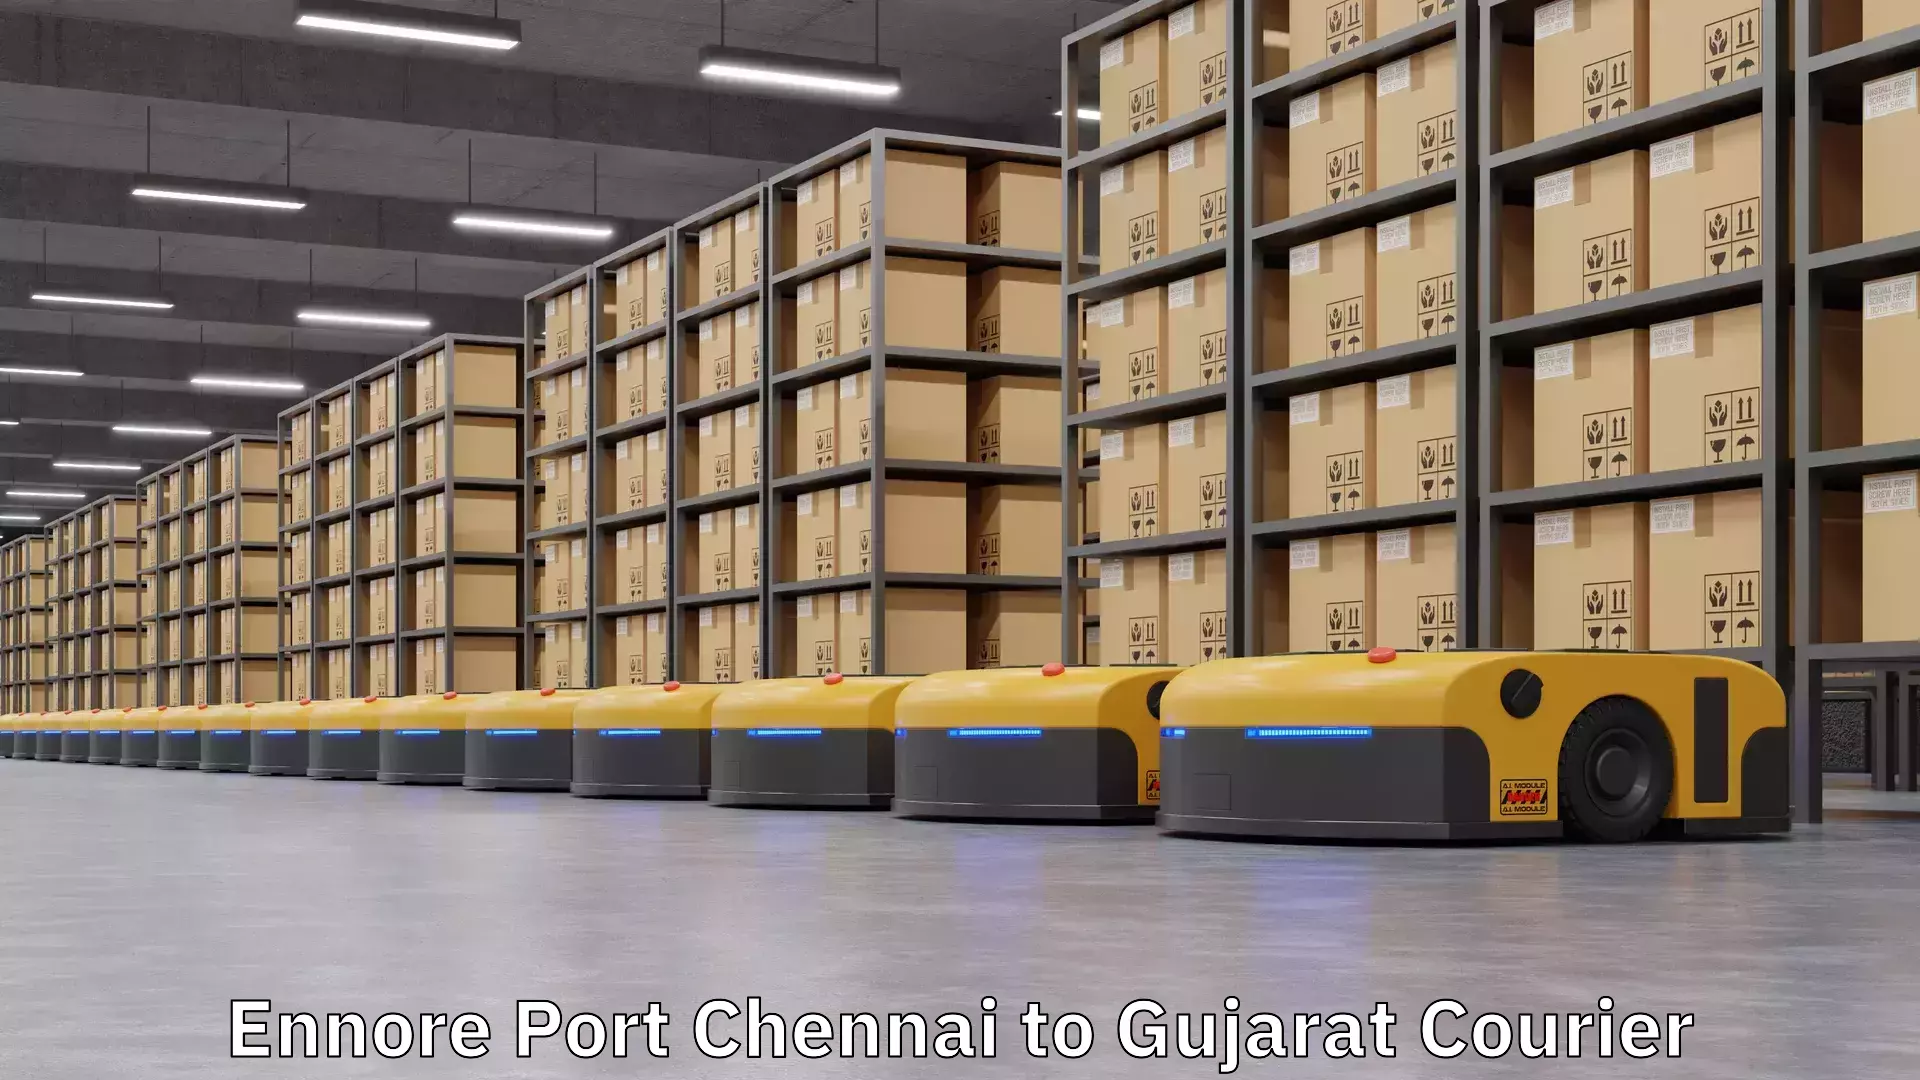 Bulk courier orders in Ennore Port Chennai to Gujarat